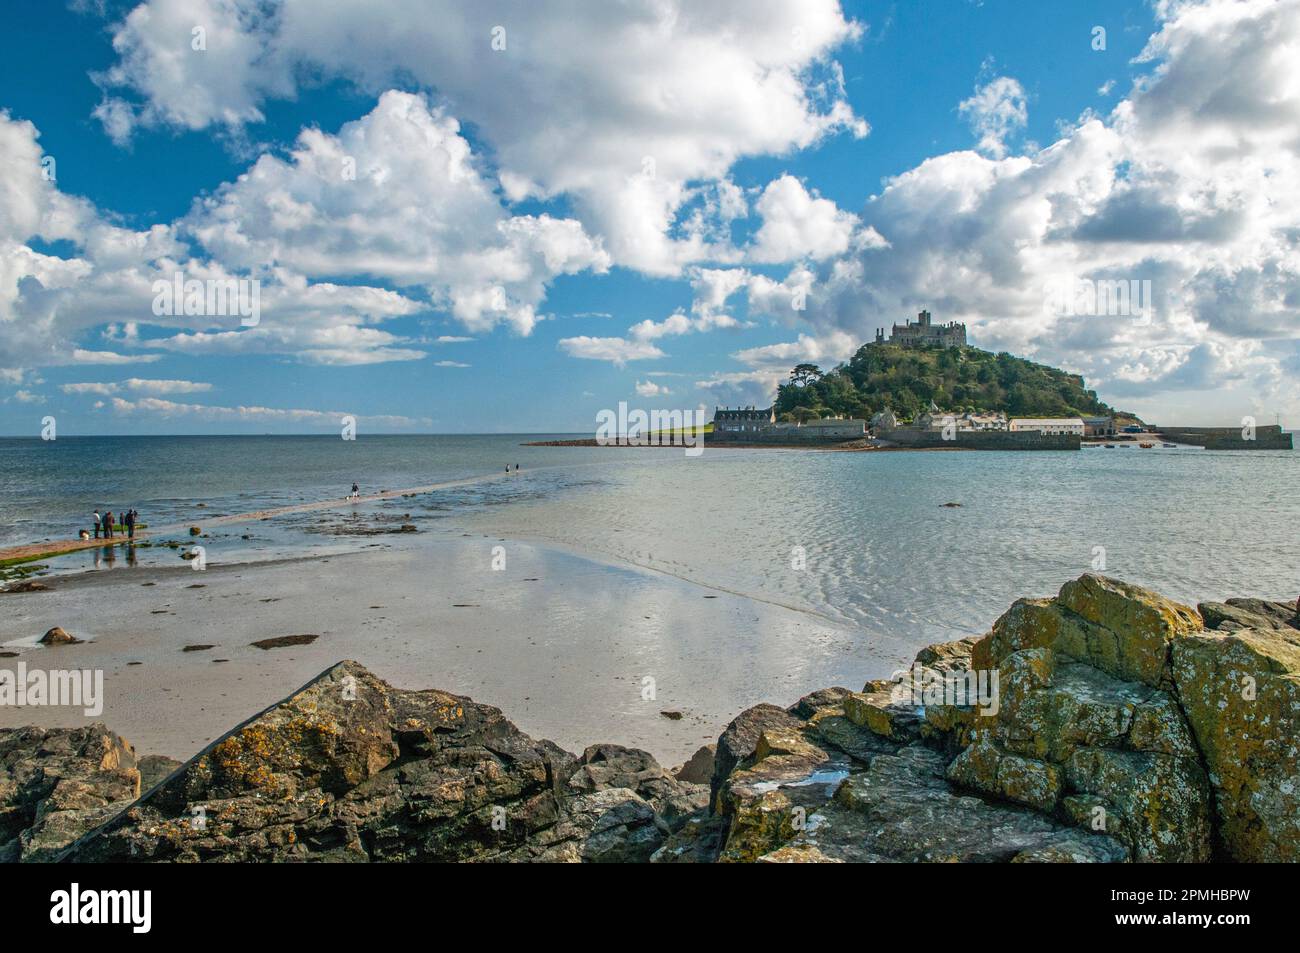 St Michaels Mount off the coast of Cornwall near Marazion on a clear sunny day in April. Rocks in the foreground and people walking across the sea. Stock Photo